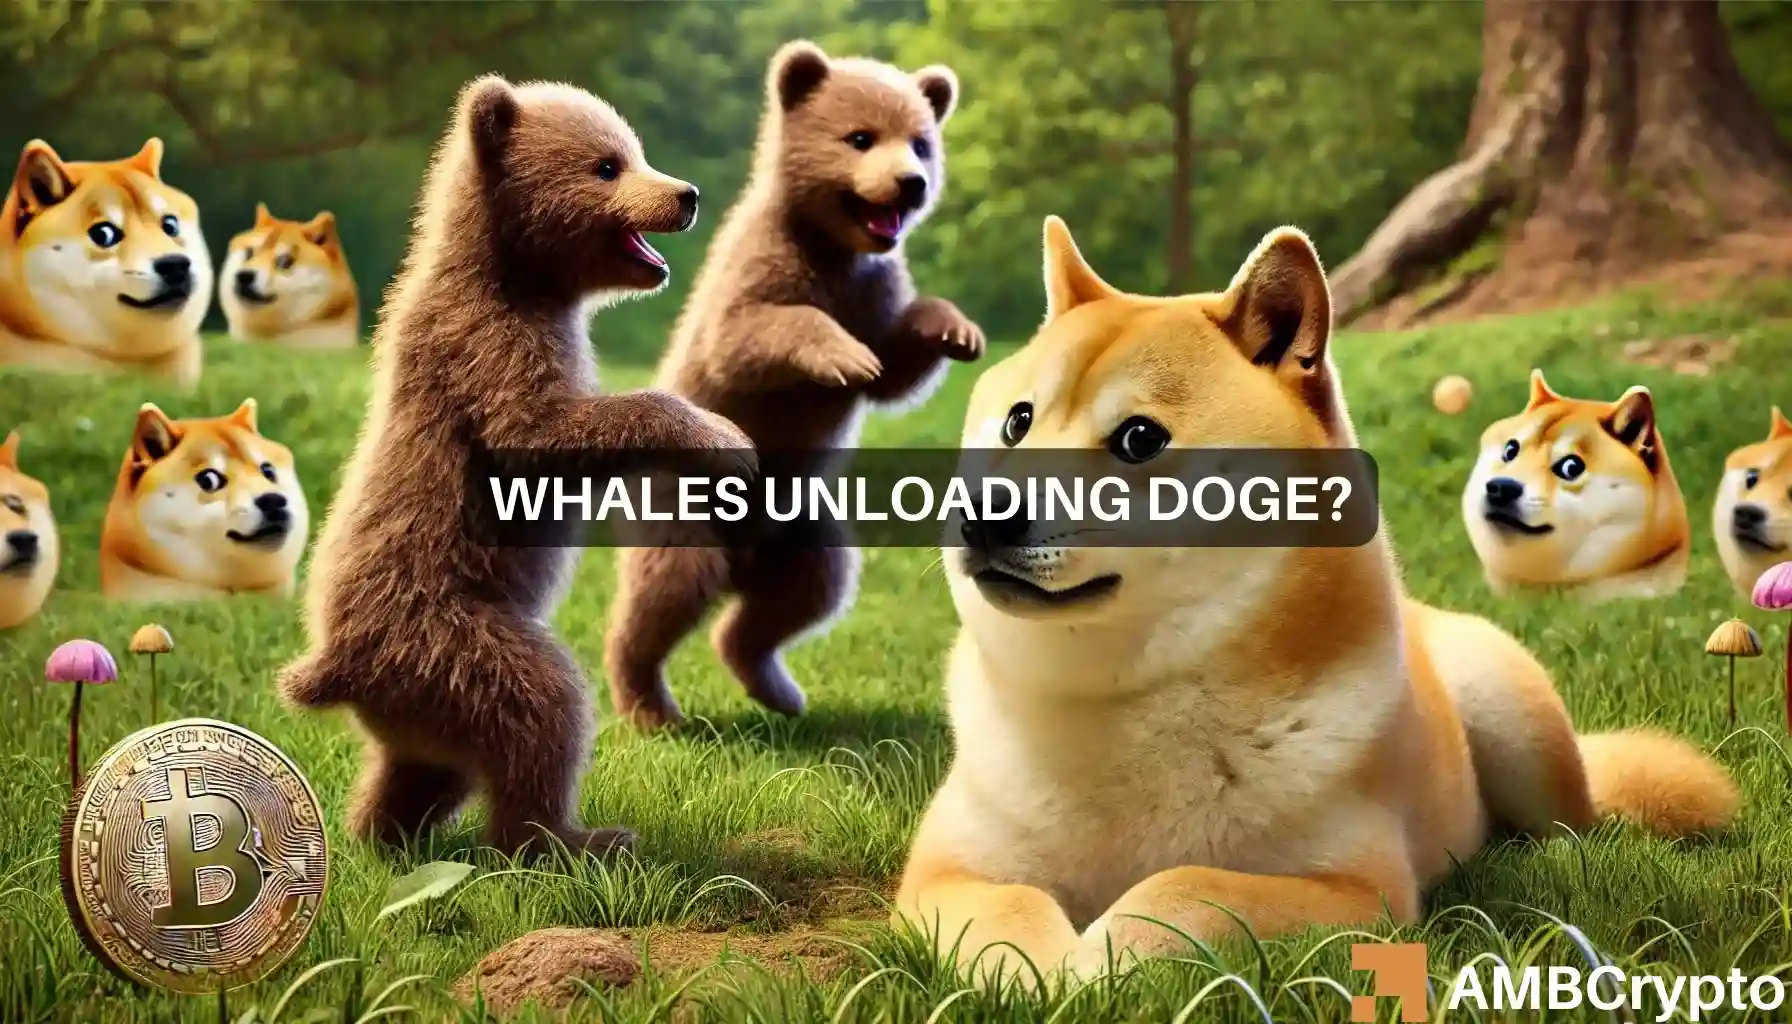 Dogecoin market watch: Is a rally possible amidst whale selling?